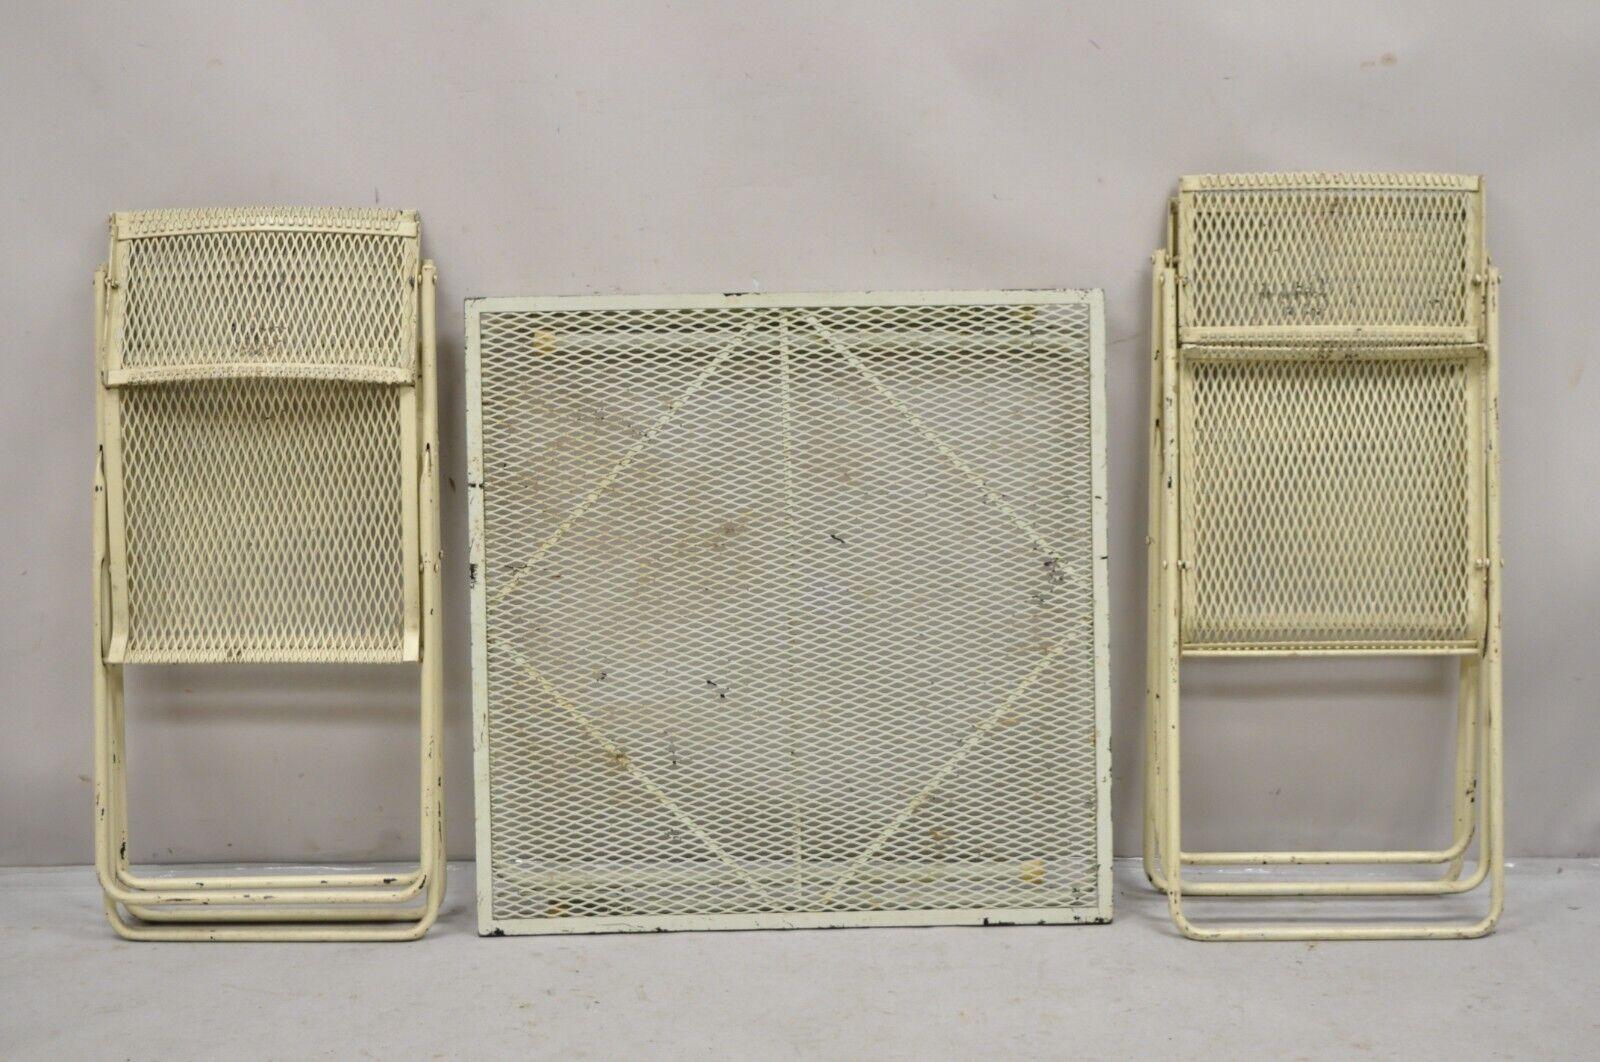 Vintage Mid Century Wrought Iron Industrial Folding Card Game Table Set 5 Pc Set. Item features 4 folding chairs with pivoting backs and one folding table, iron metal mesh frames, folding design, beige painted finish, very unique vintage set. Circa